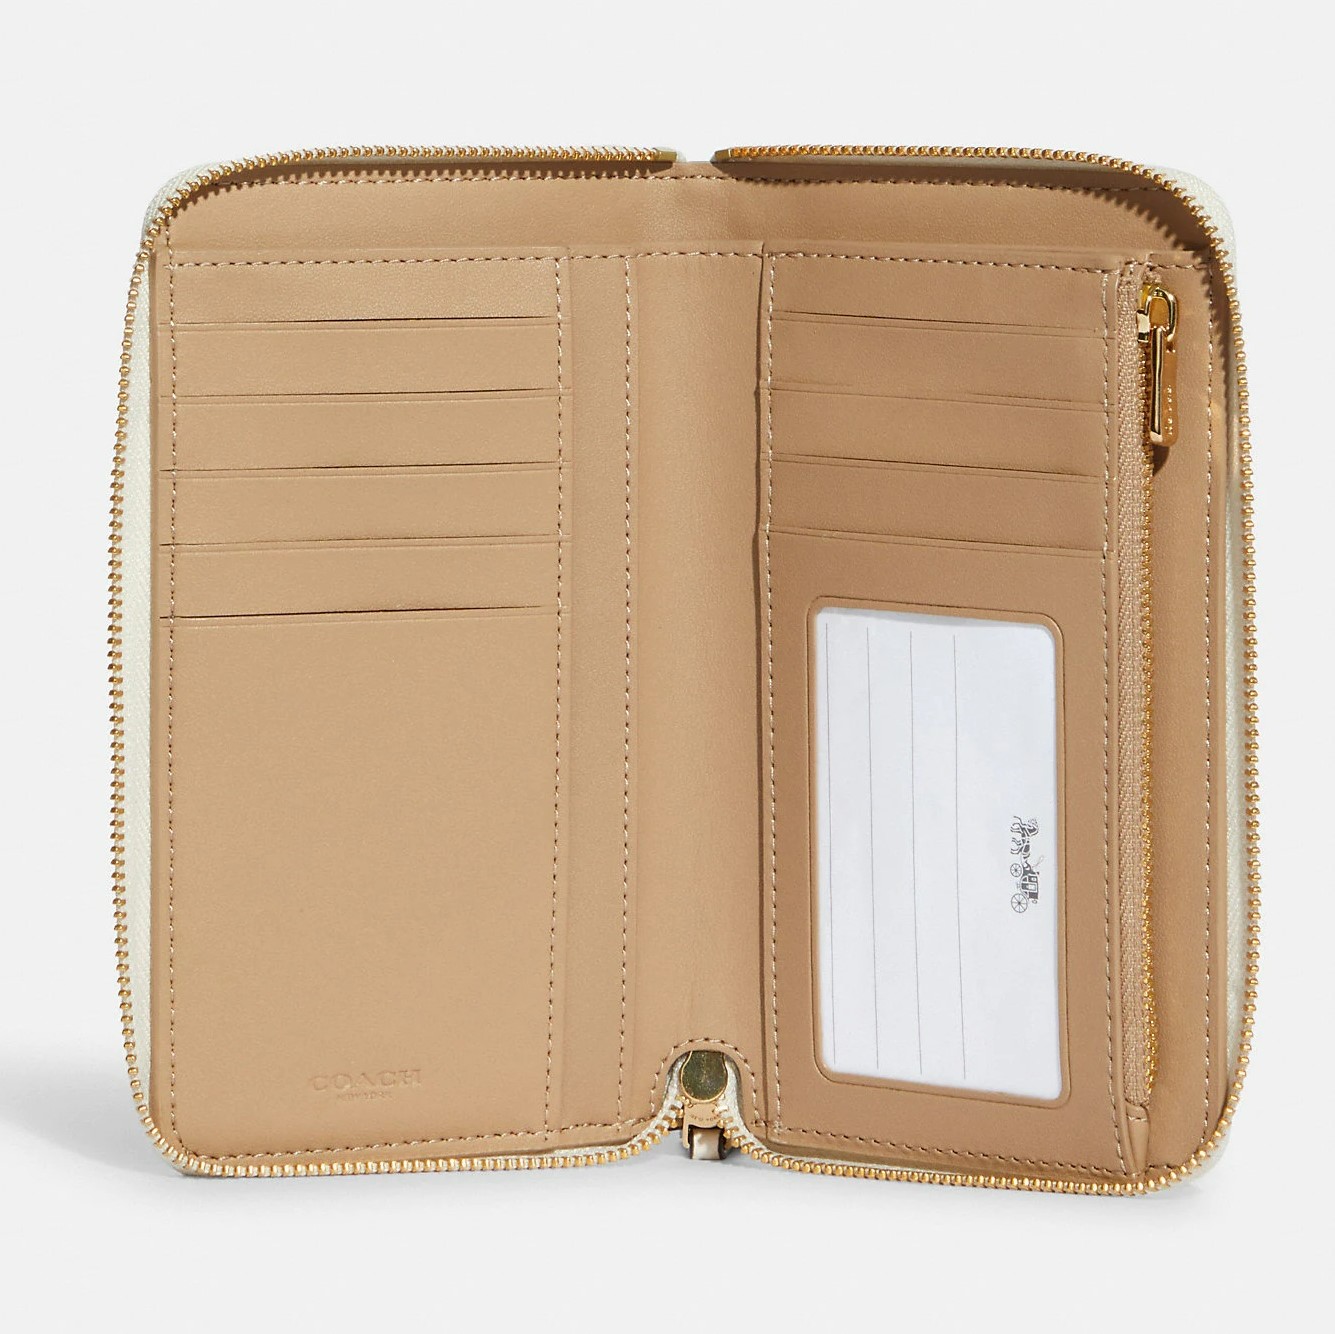 VÍ DÀI WHITE COACH MEDIUM ID ZIP WALLET WITH DIARY EMBROIDERY 1